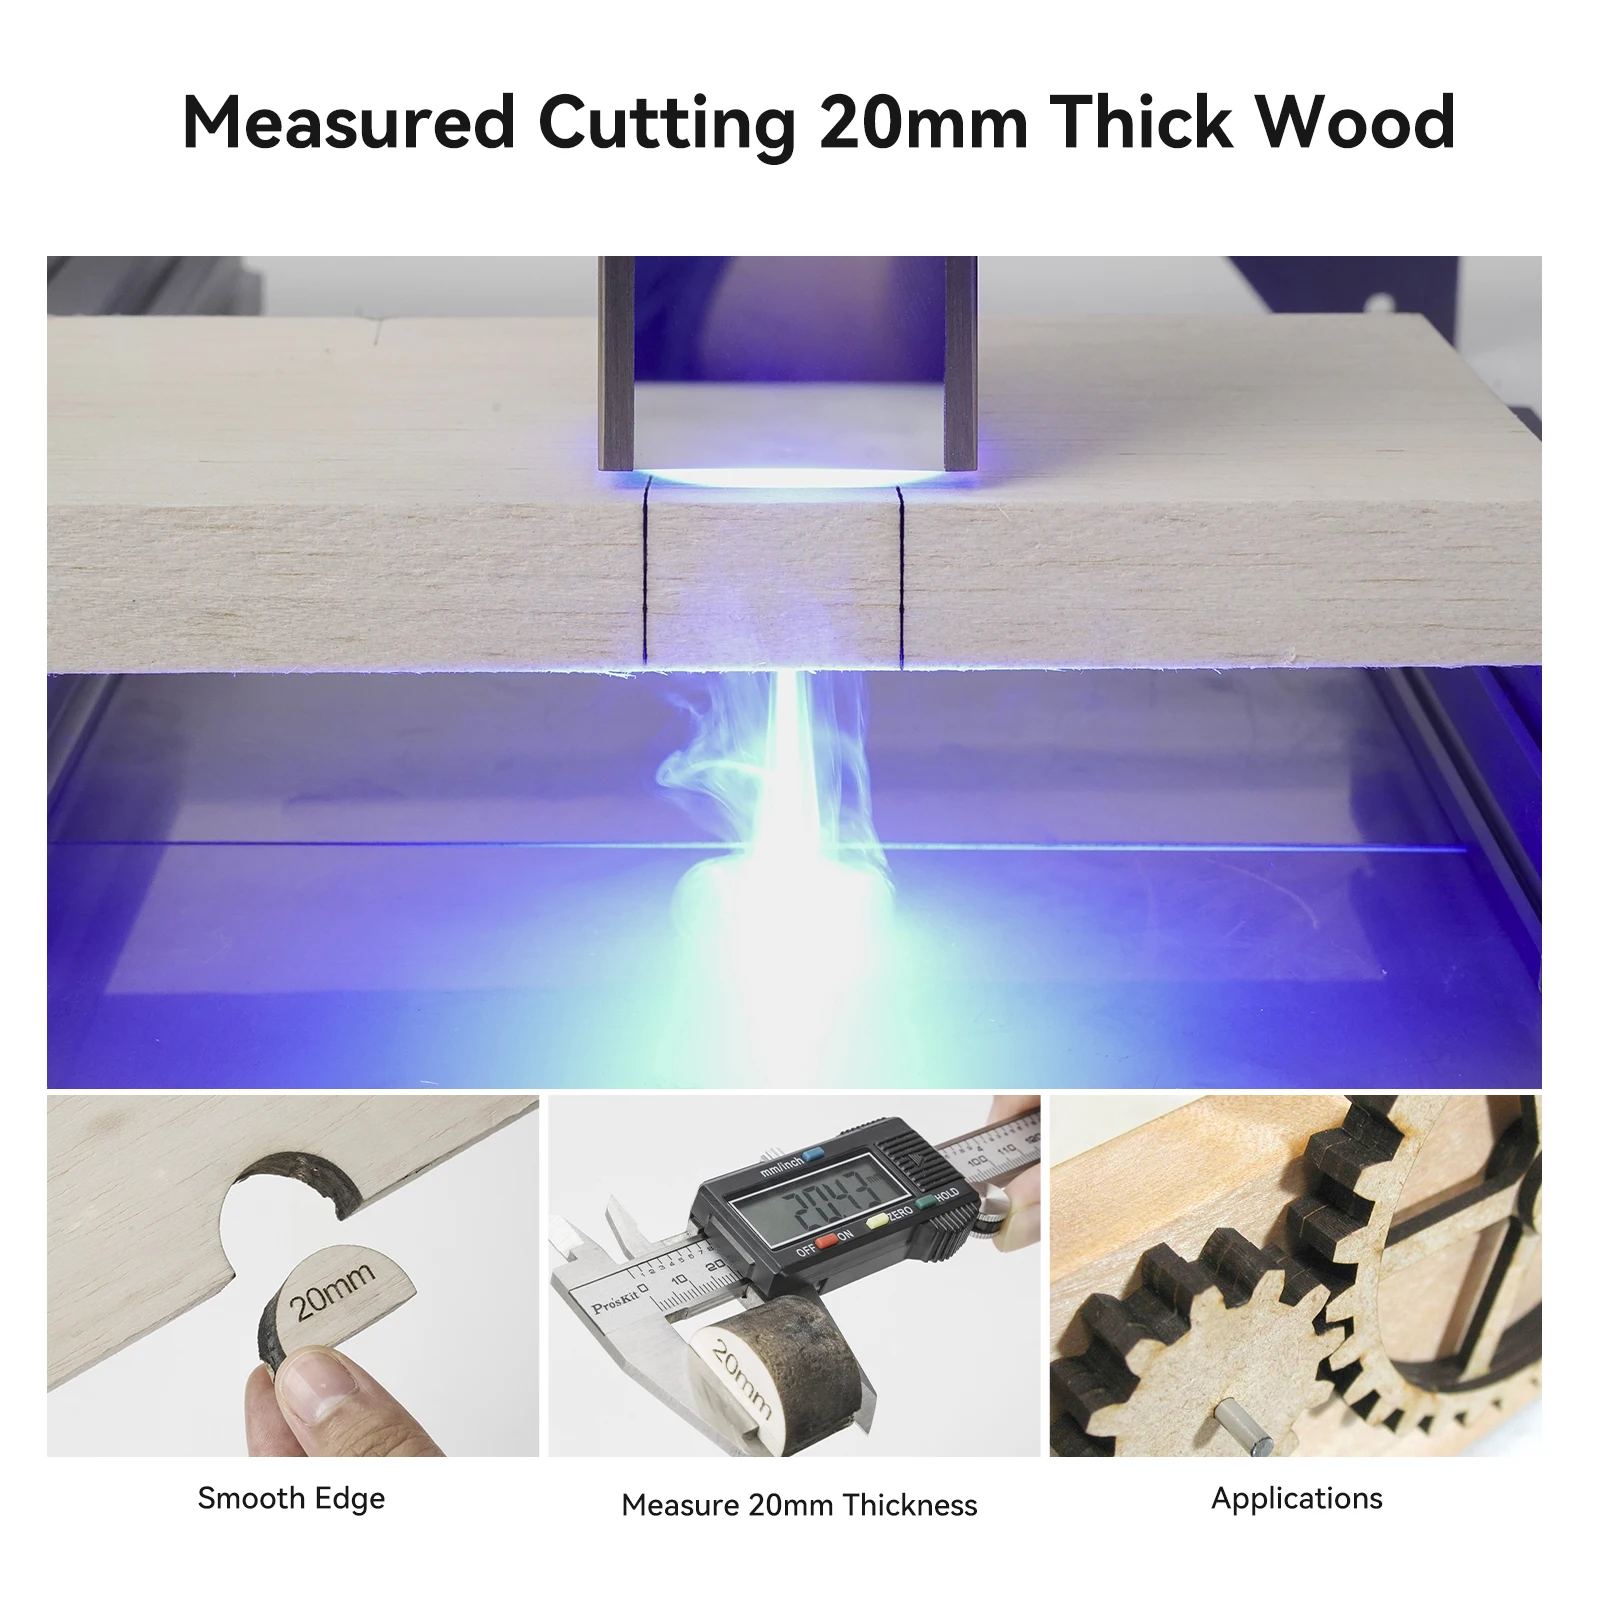 ATOMSTACK S10 Pro CNC Desktop DIY Laser Engraving Cutting Machine with 410x400mm Engraving Area Fixed-Focus Ultra-thin Laser